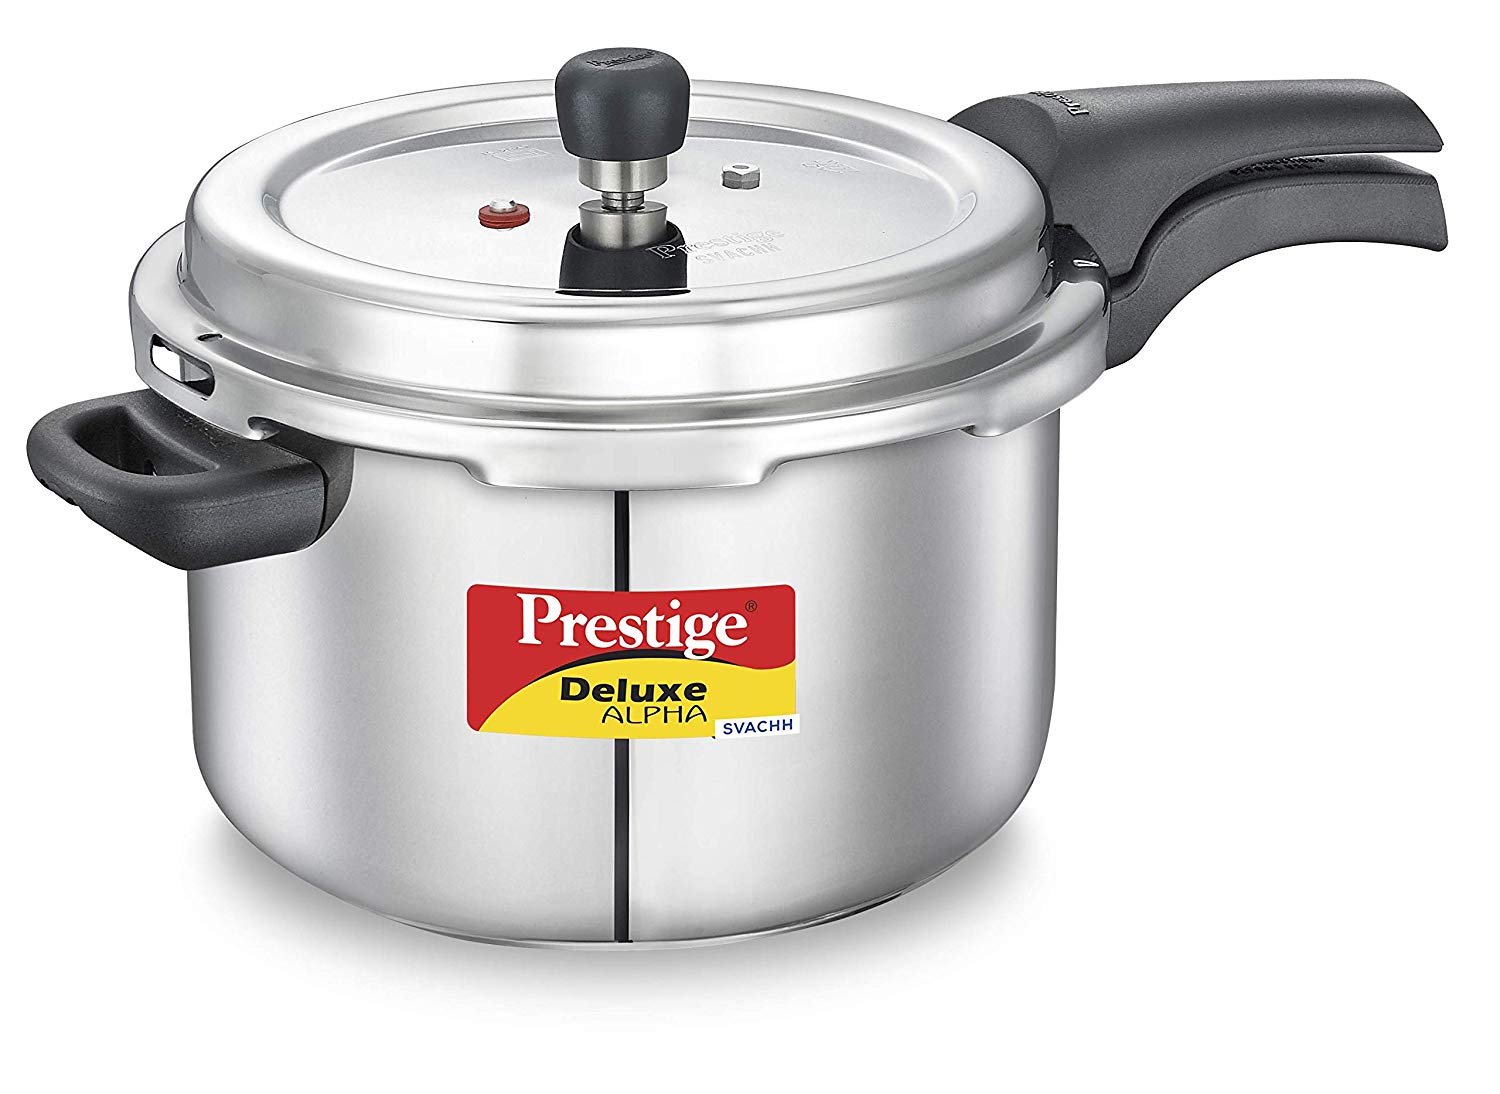  SS Deluxe Alpha Svachh Stainless steel Pressure Cooker 6.5 L